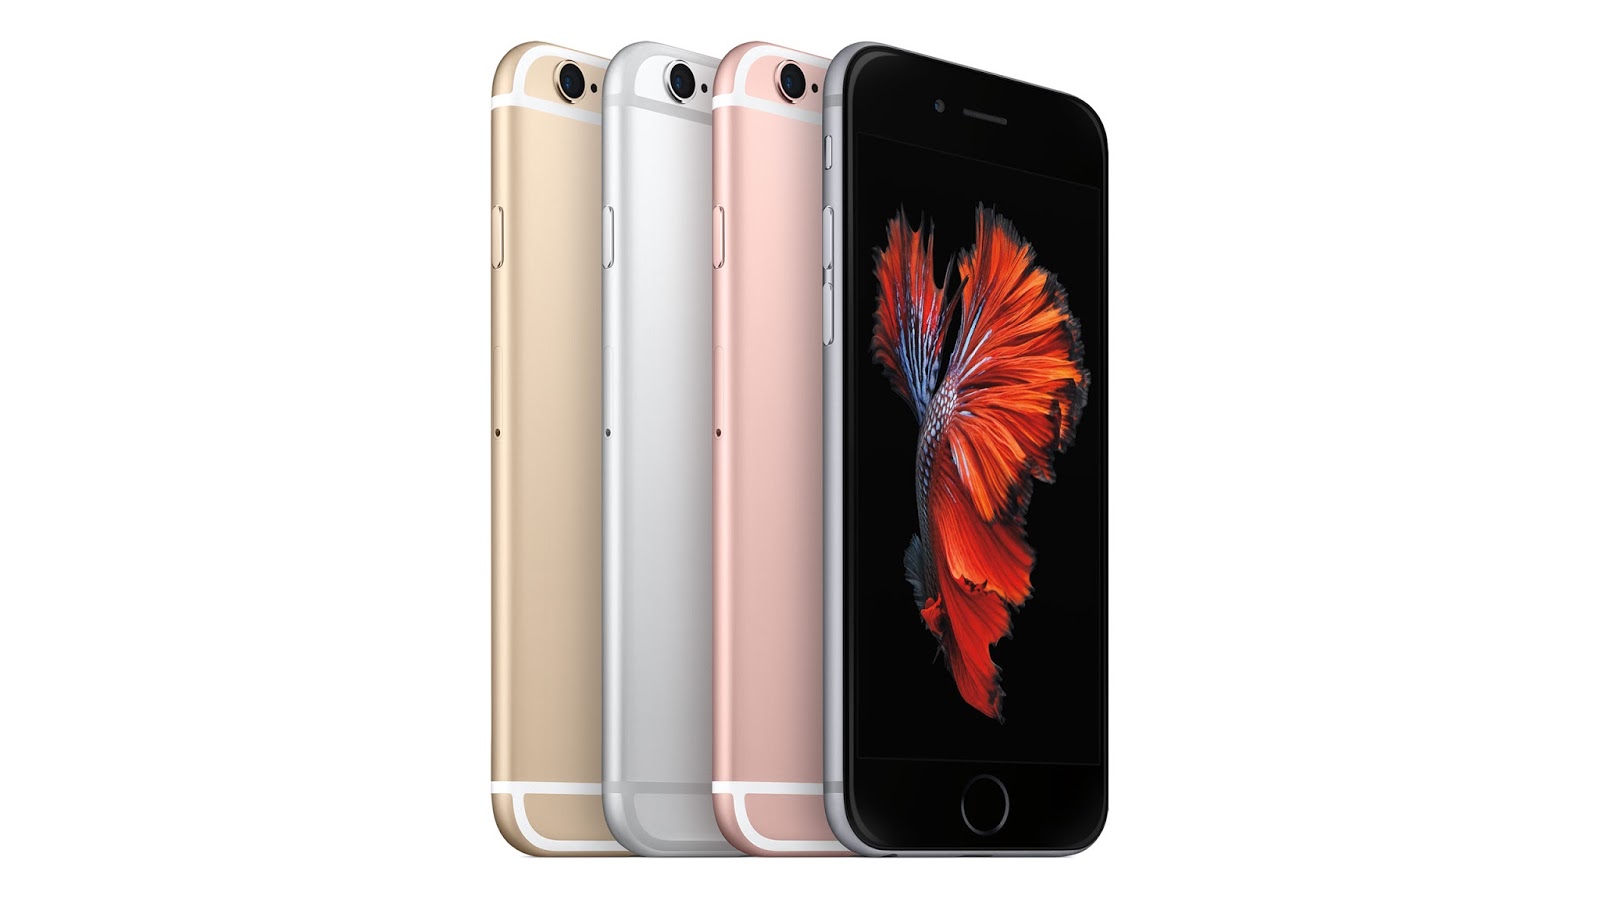 iPhone 6s and iPhone 6s Plus in Pictures ~ Andros Maniac